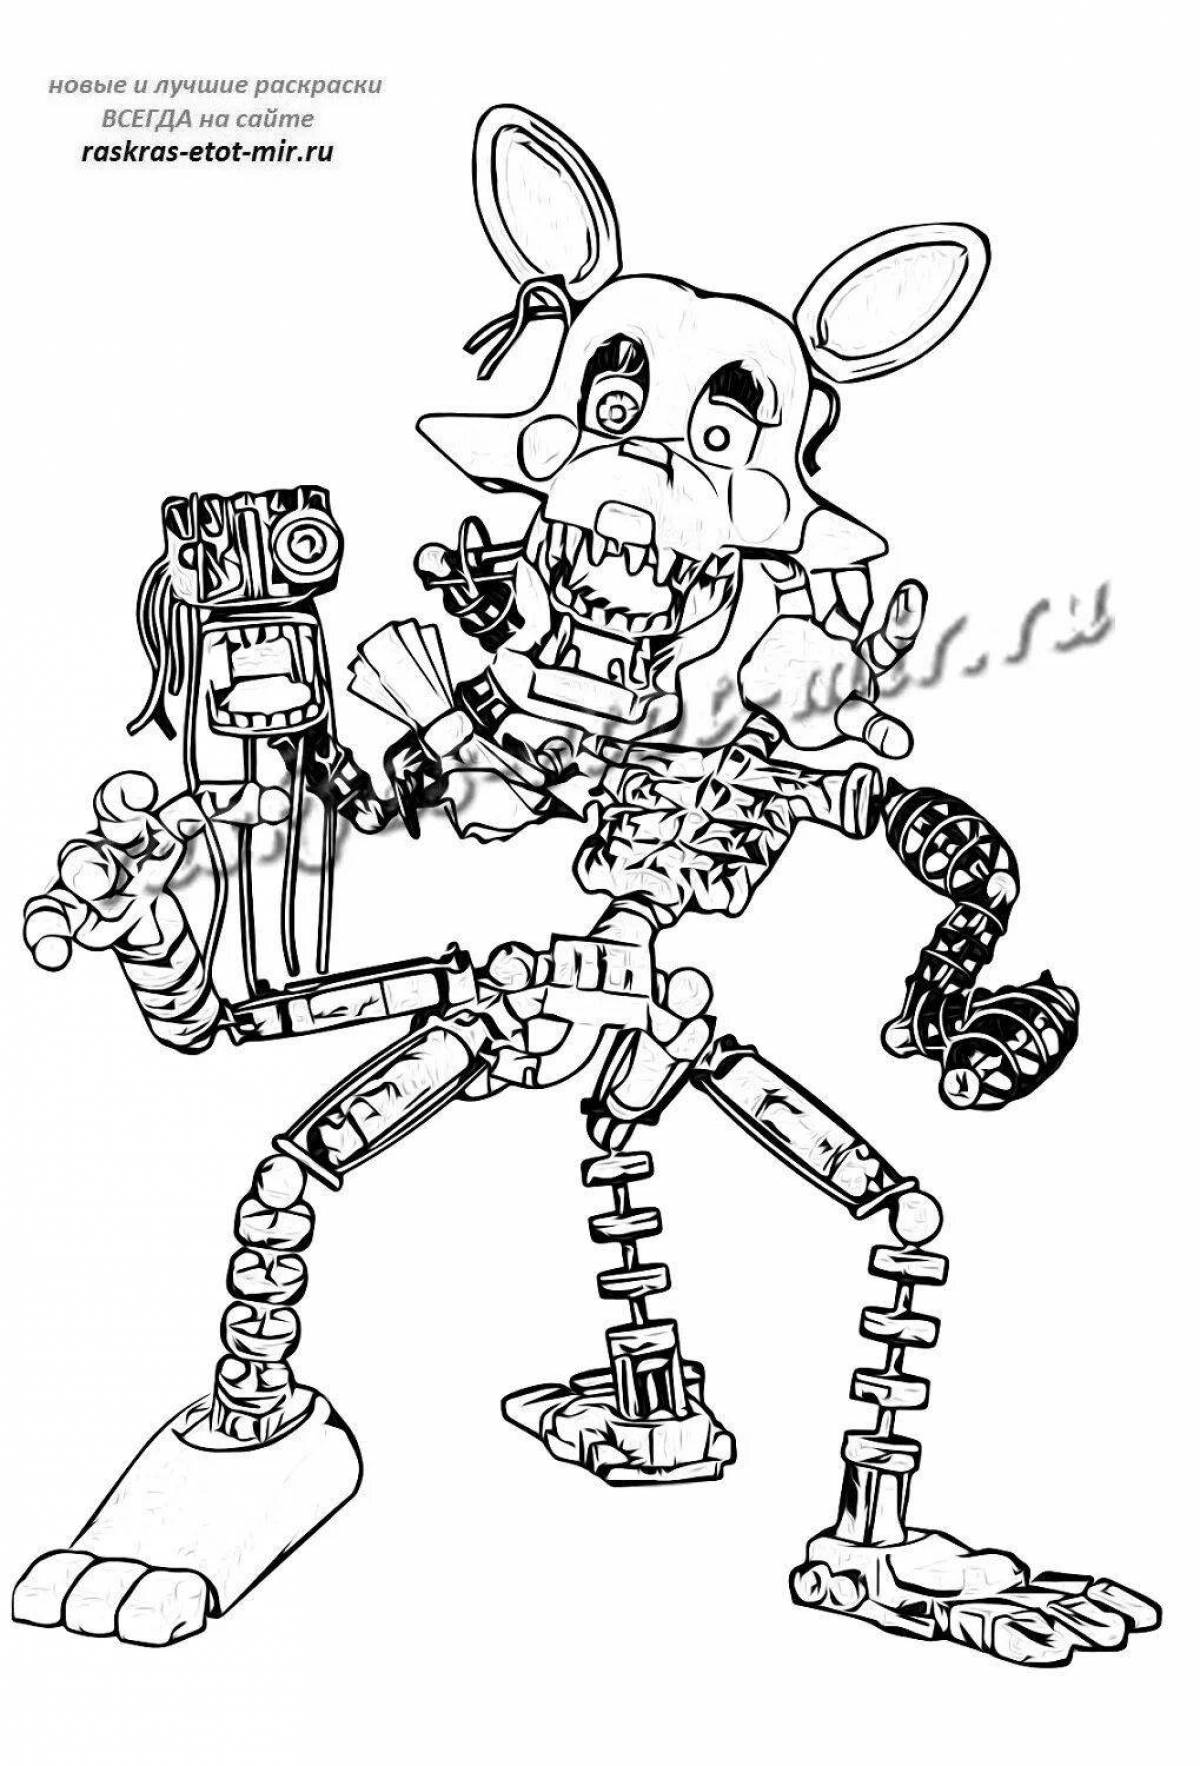 Fnaf2 awesome coloring book